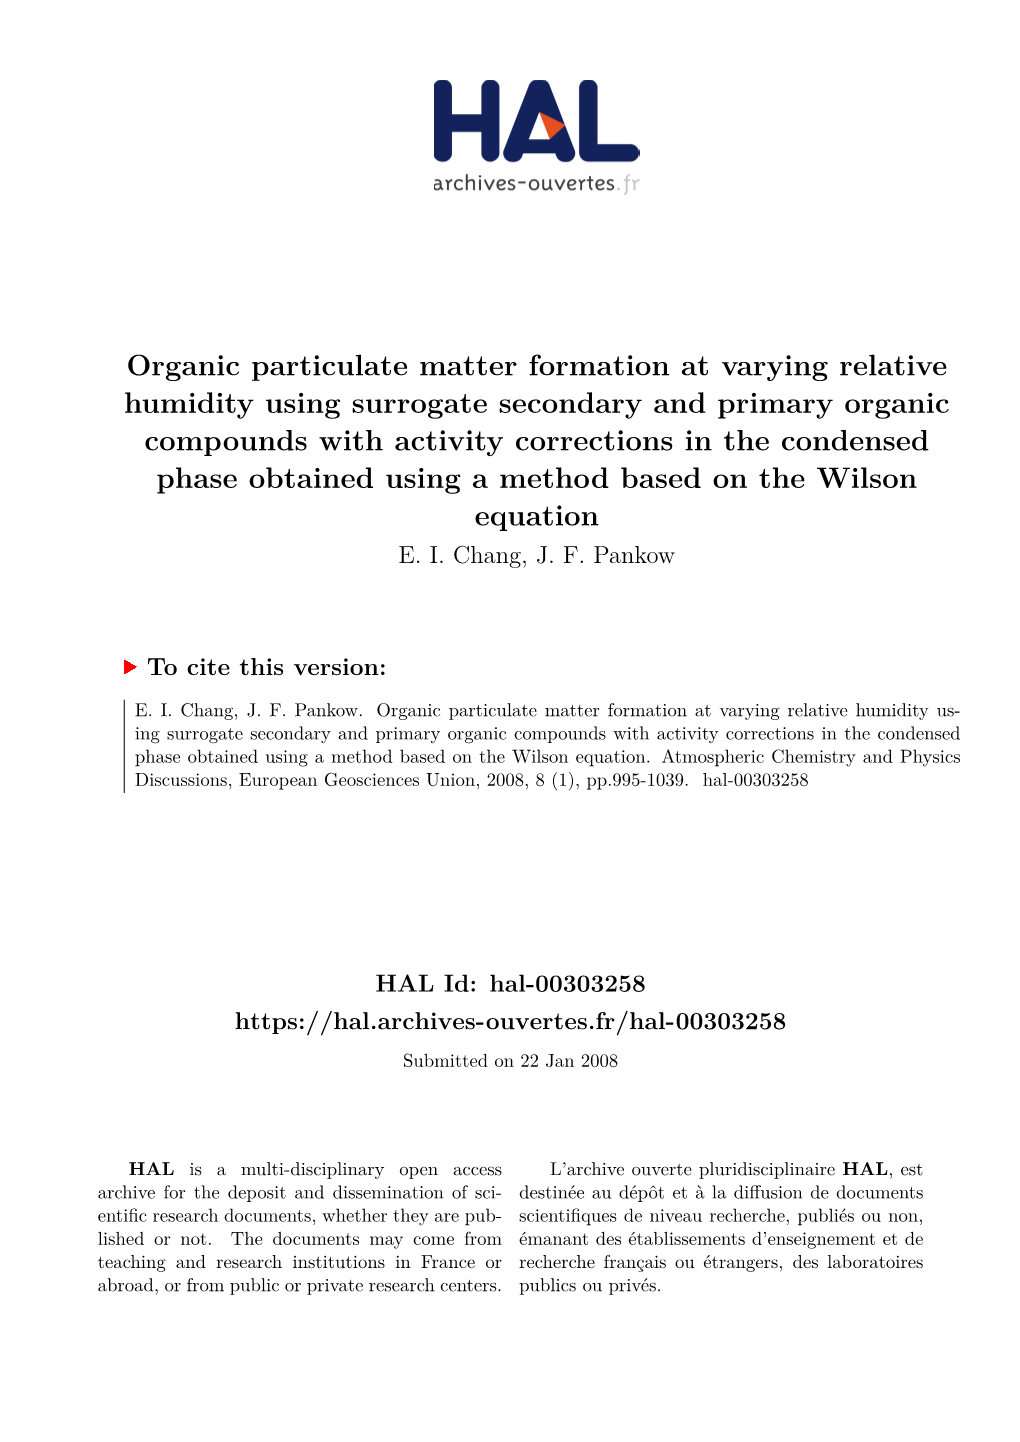 Organic Particulate Matter Formation at Varying Relative Humidity Using